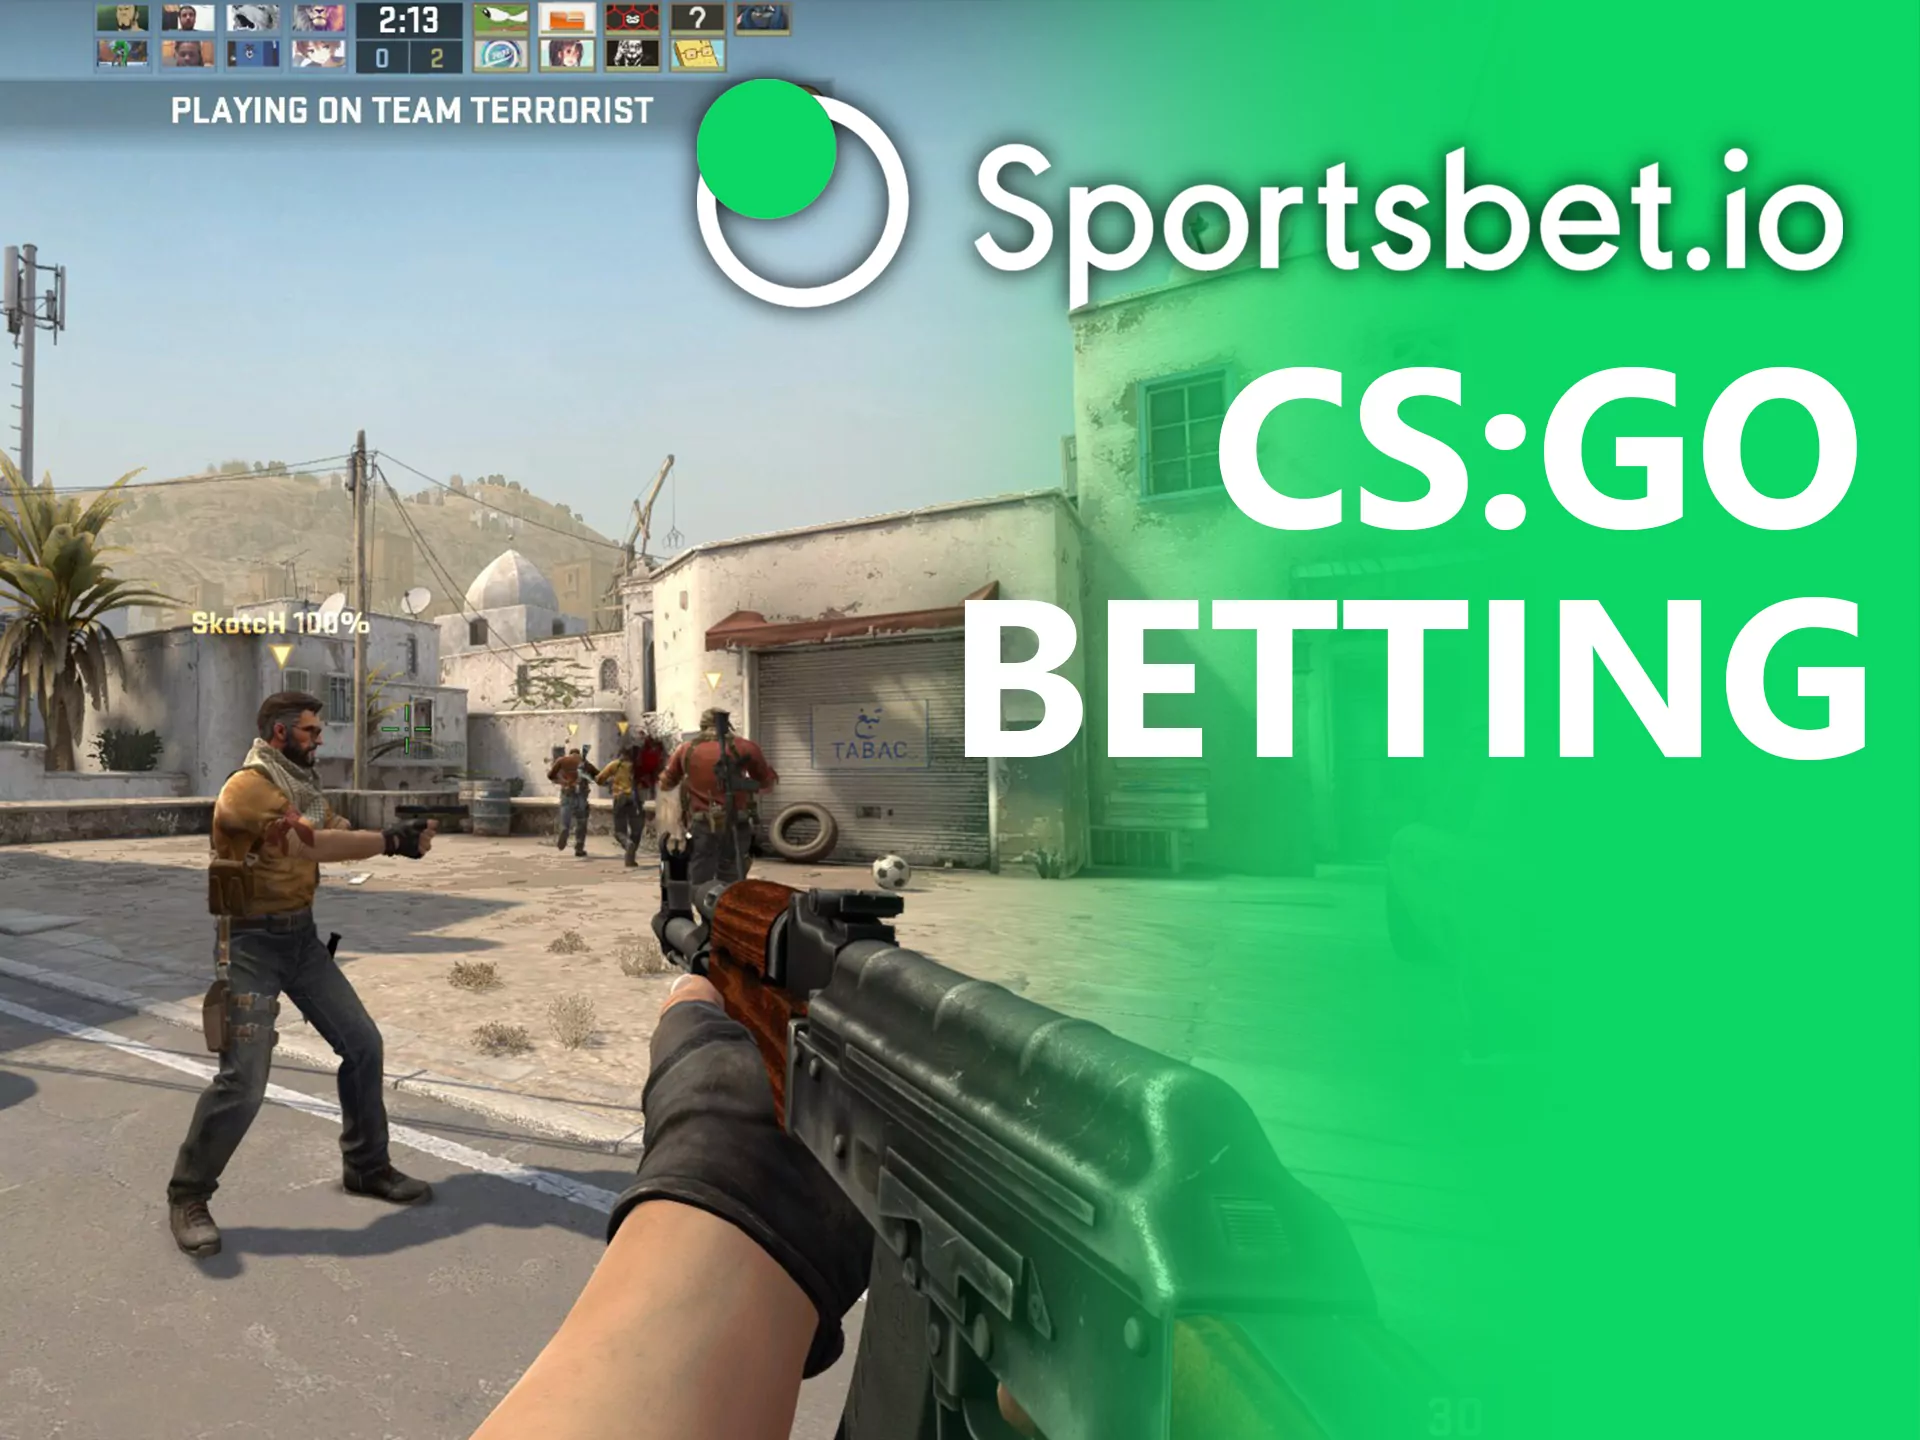 There is a CS:GO line for betting at Sportsbet.